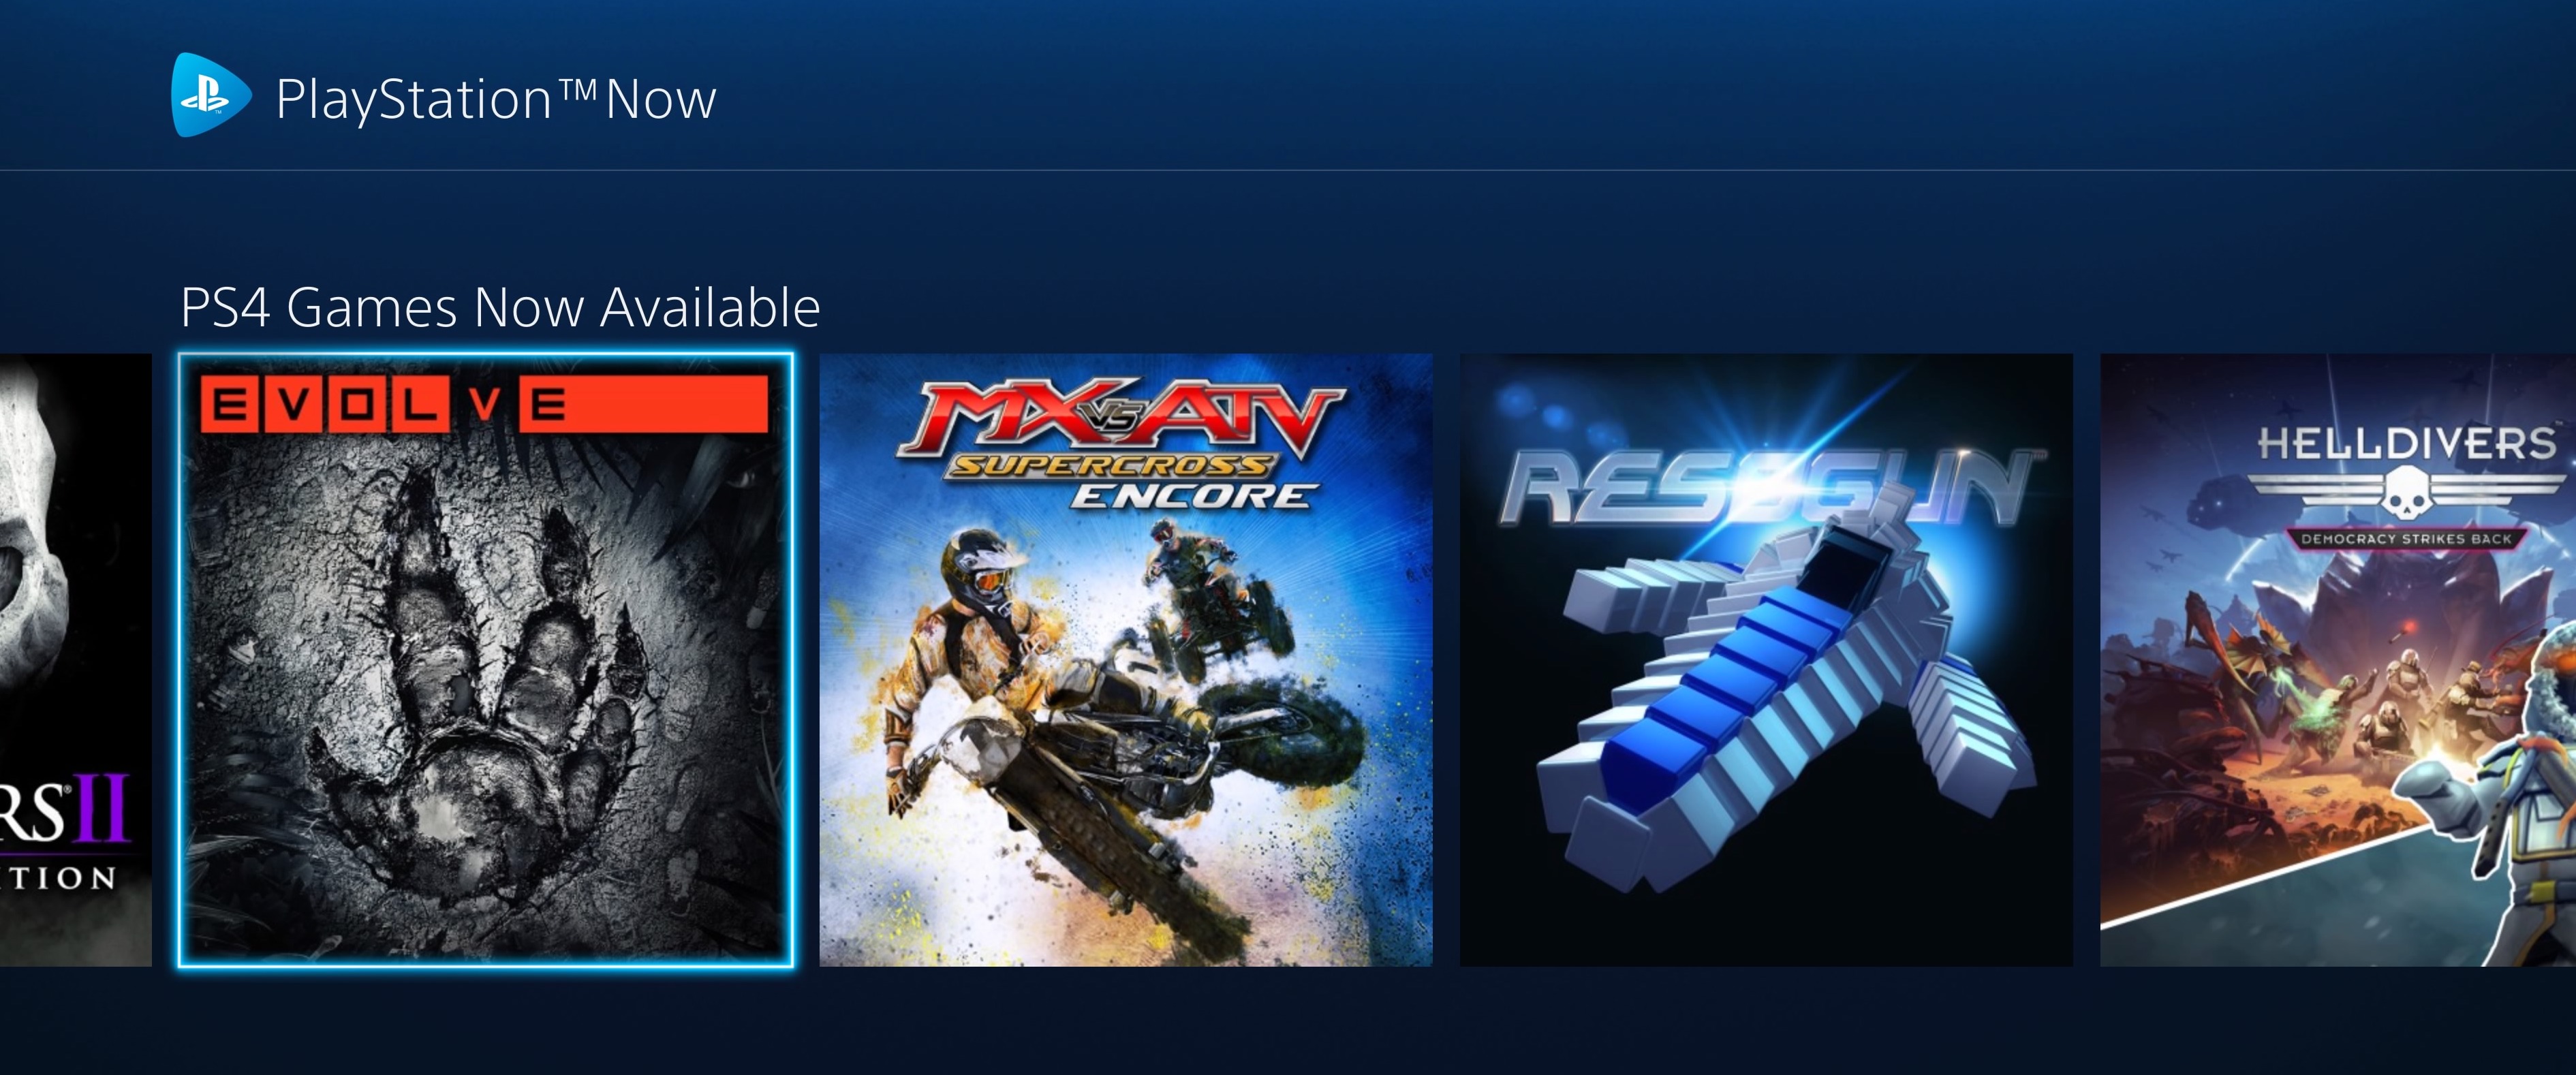 ps4 games available now